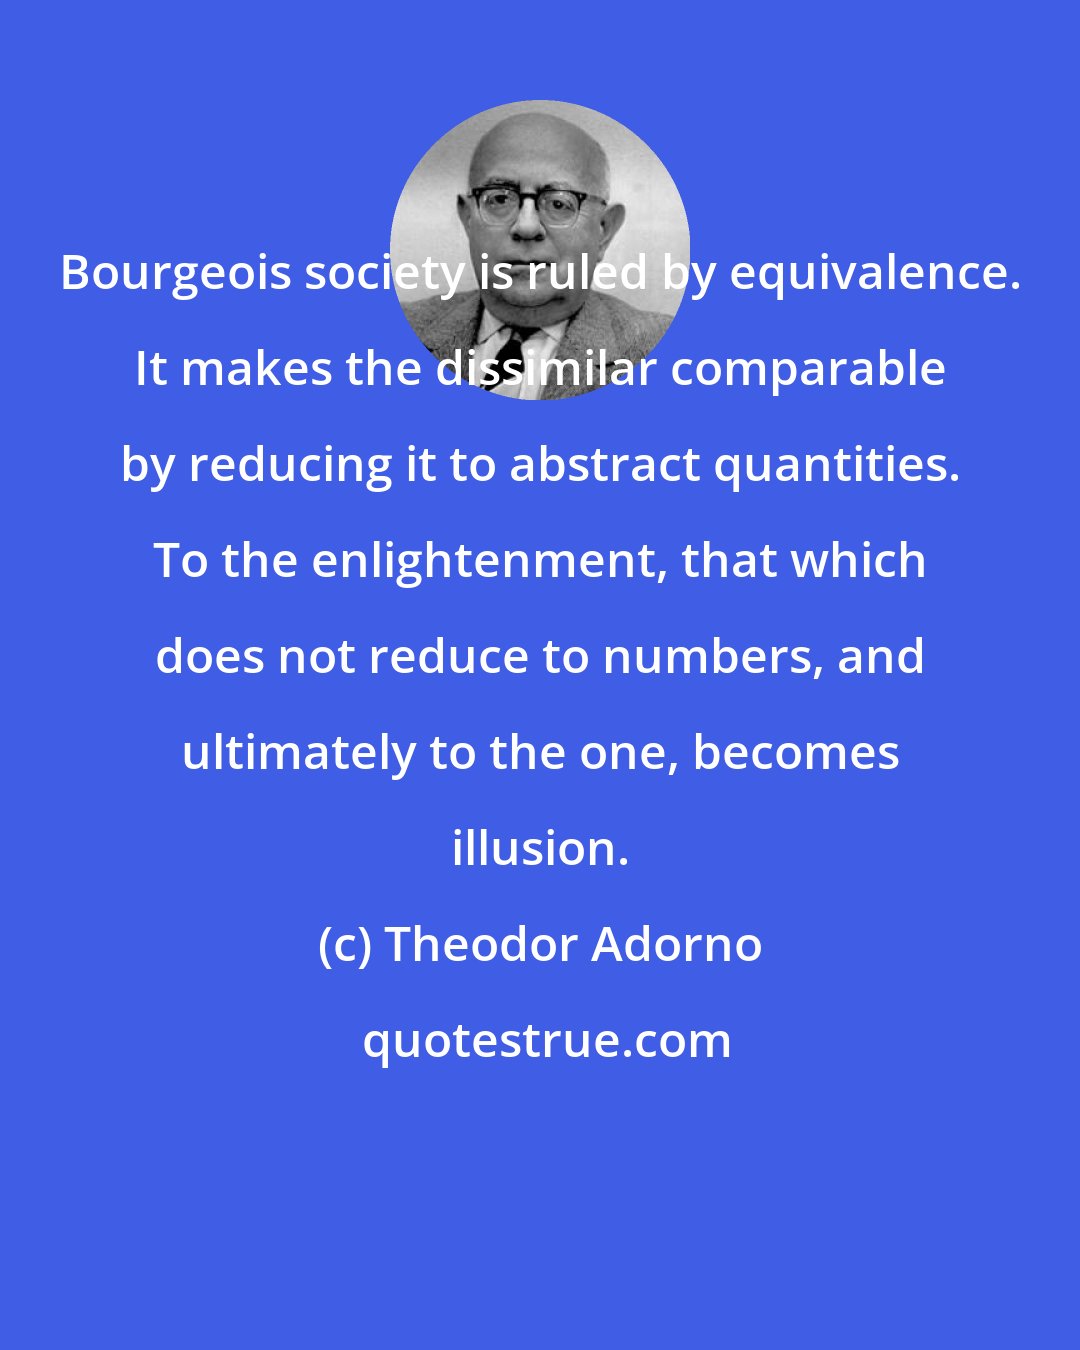 Theodor Adorno: Bourgeois society is ruled by equivalence. It makes the dissimilar comparable by reducing it to abstract quantities. To the enlightenment, that which does not reduce to numbers, and ultimately to the one, becomes illusion.